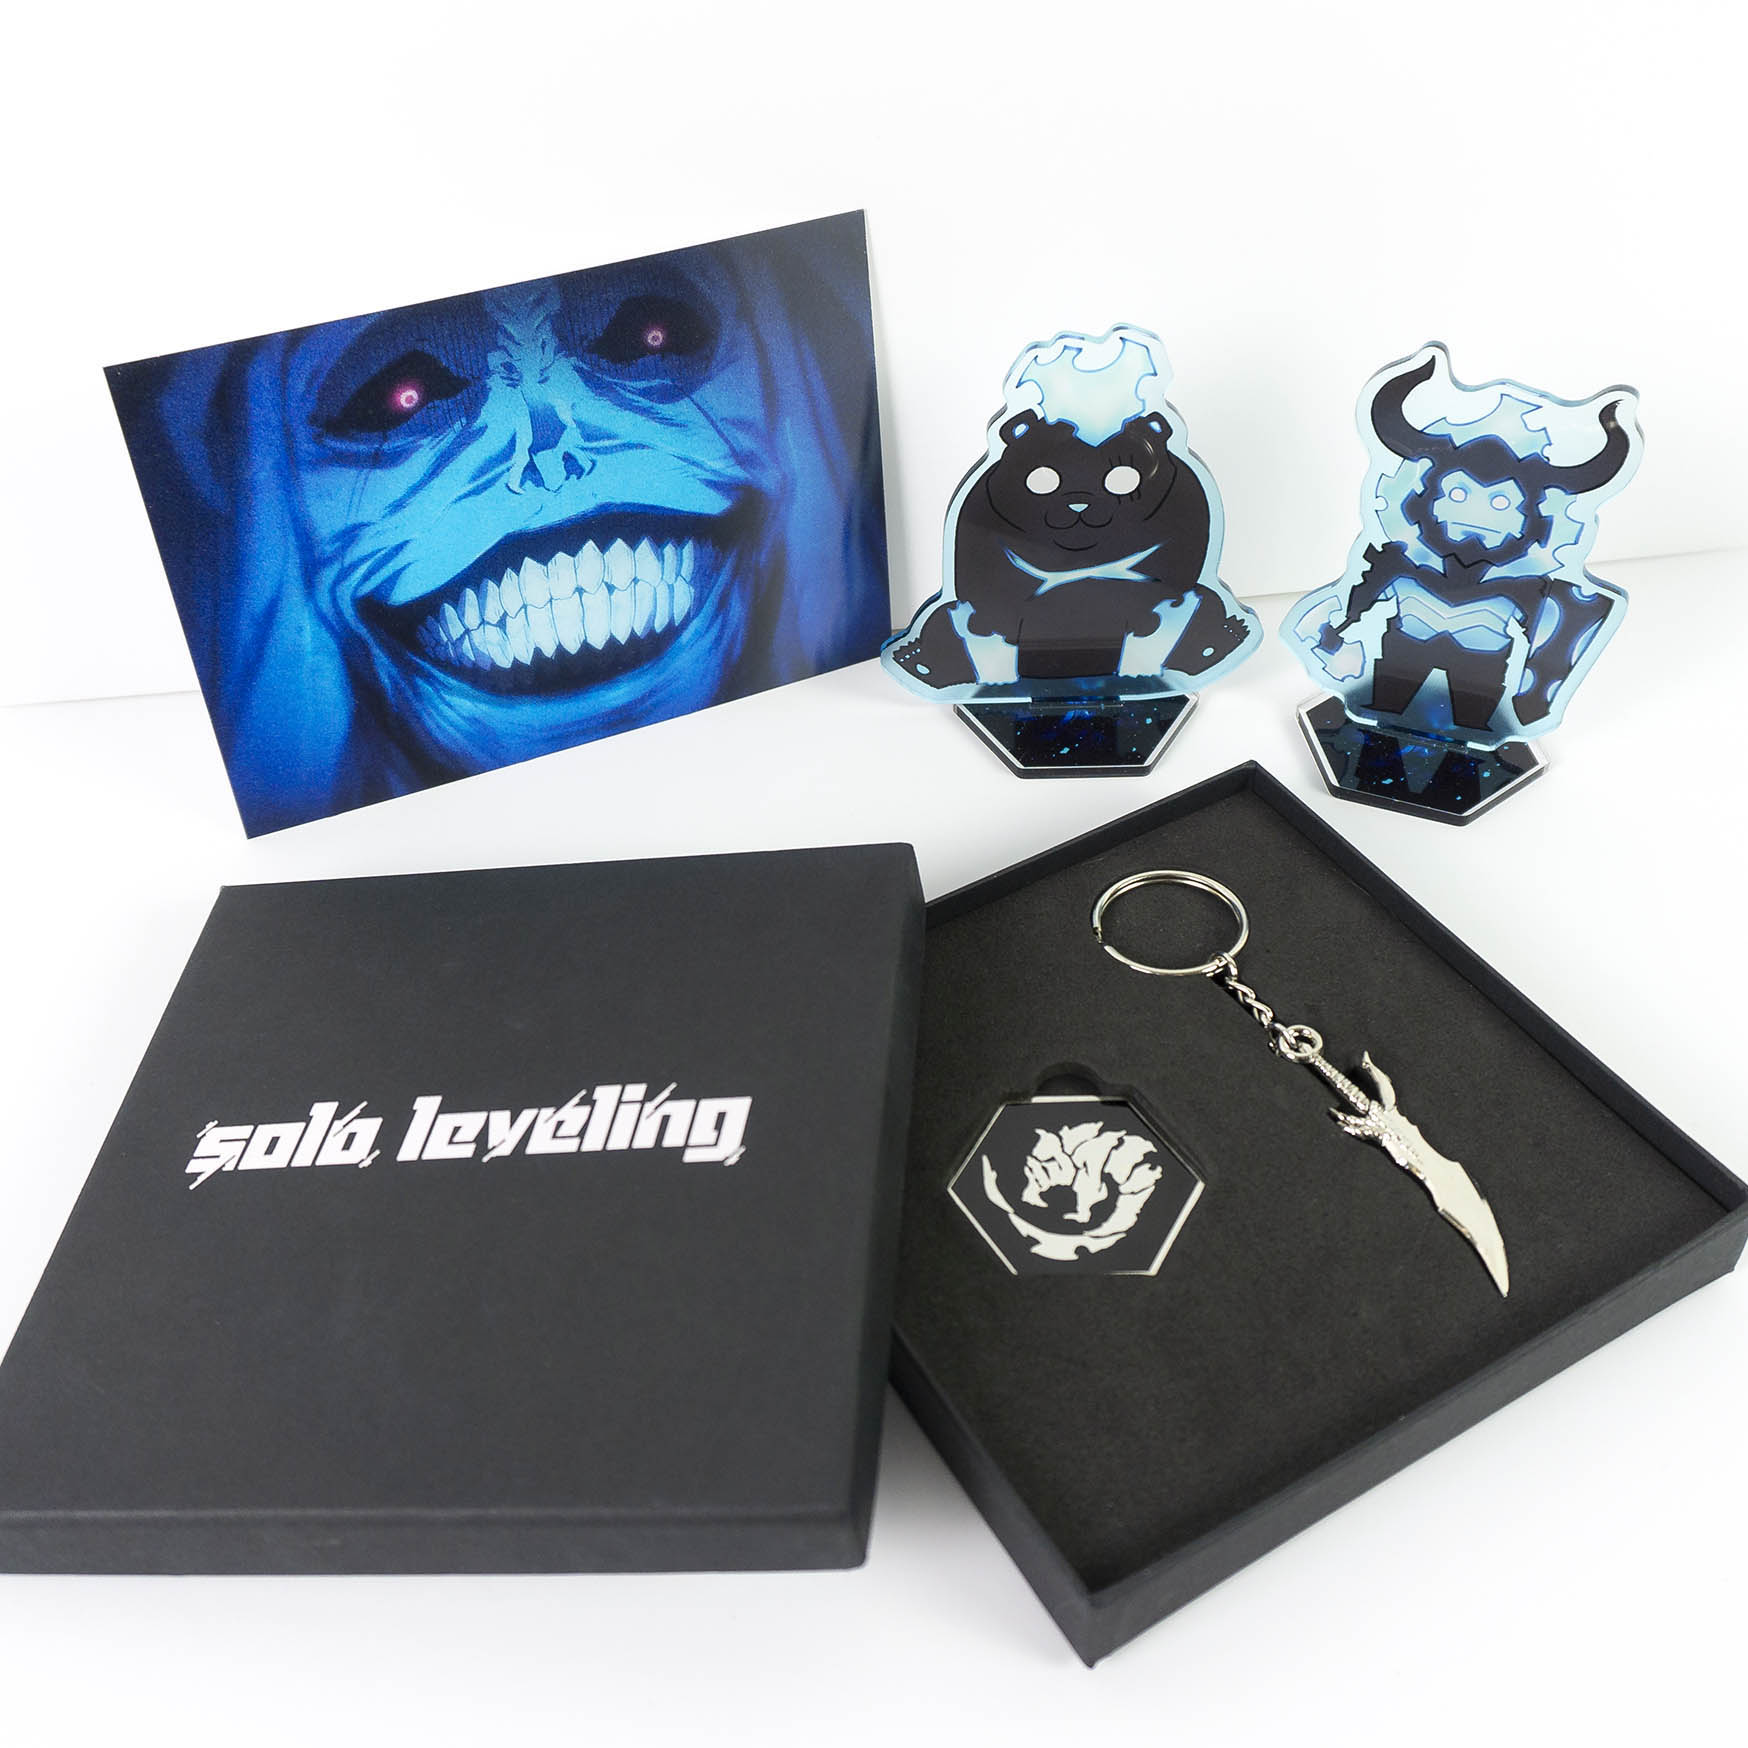 Solo Leveling«: Produktbild zur Collector's Edition